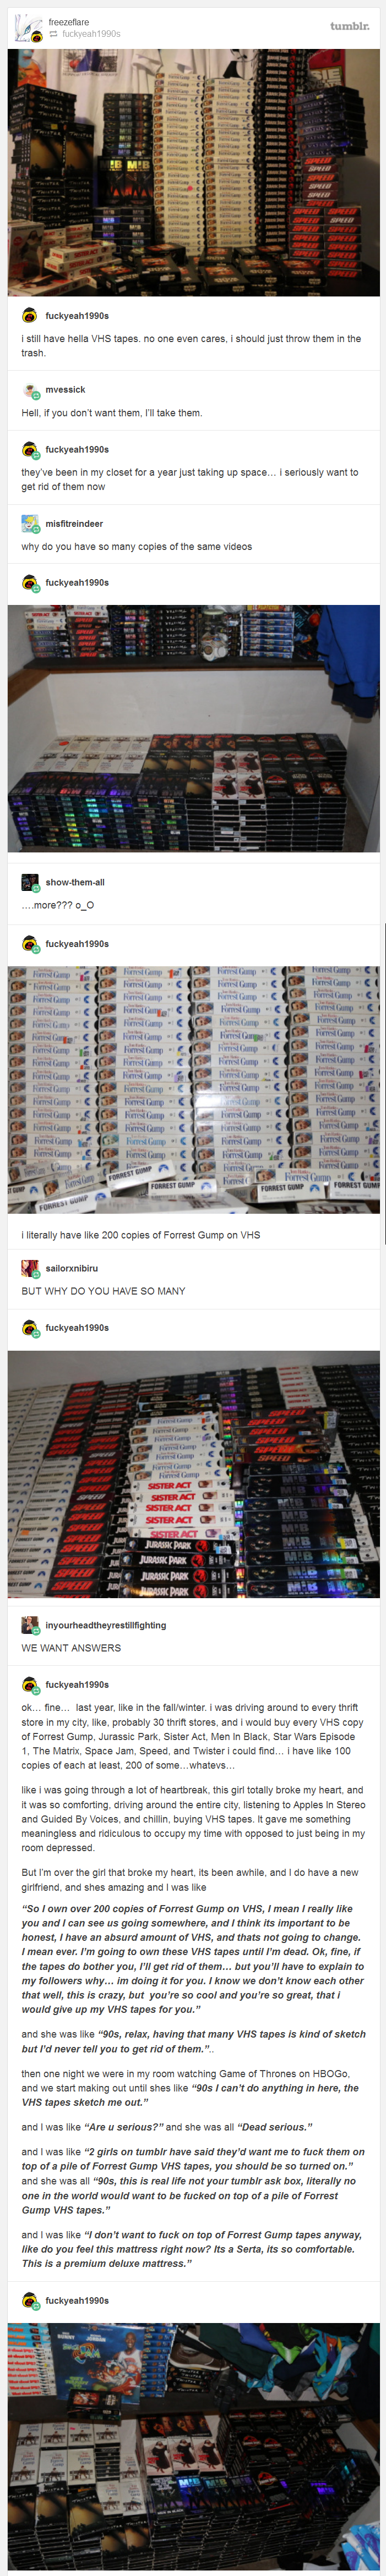 Why+do+you+have+so+many+VHS+tapes%3F